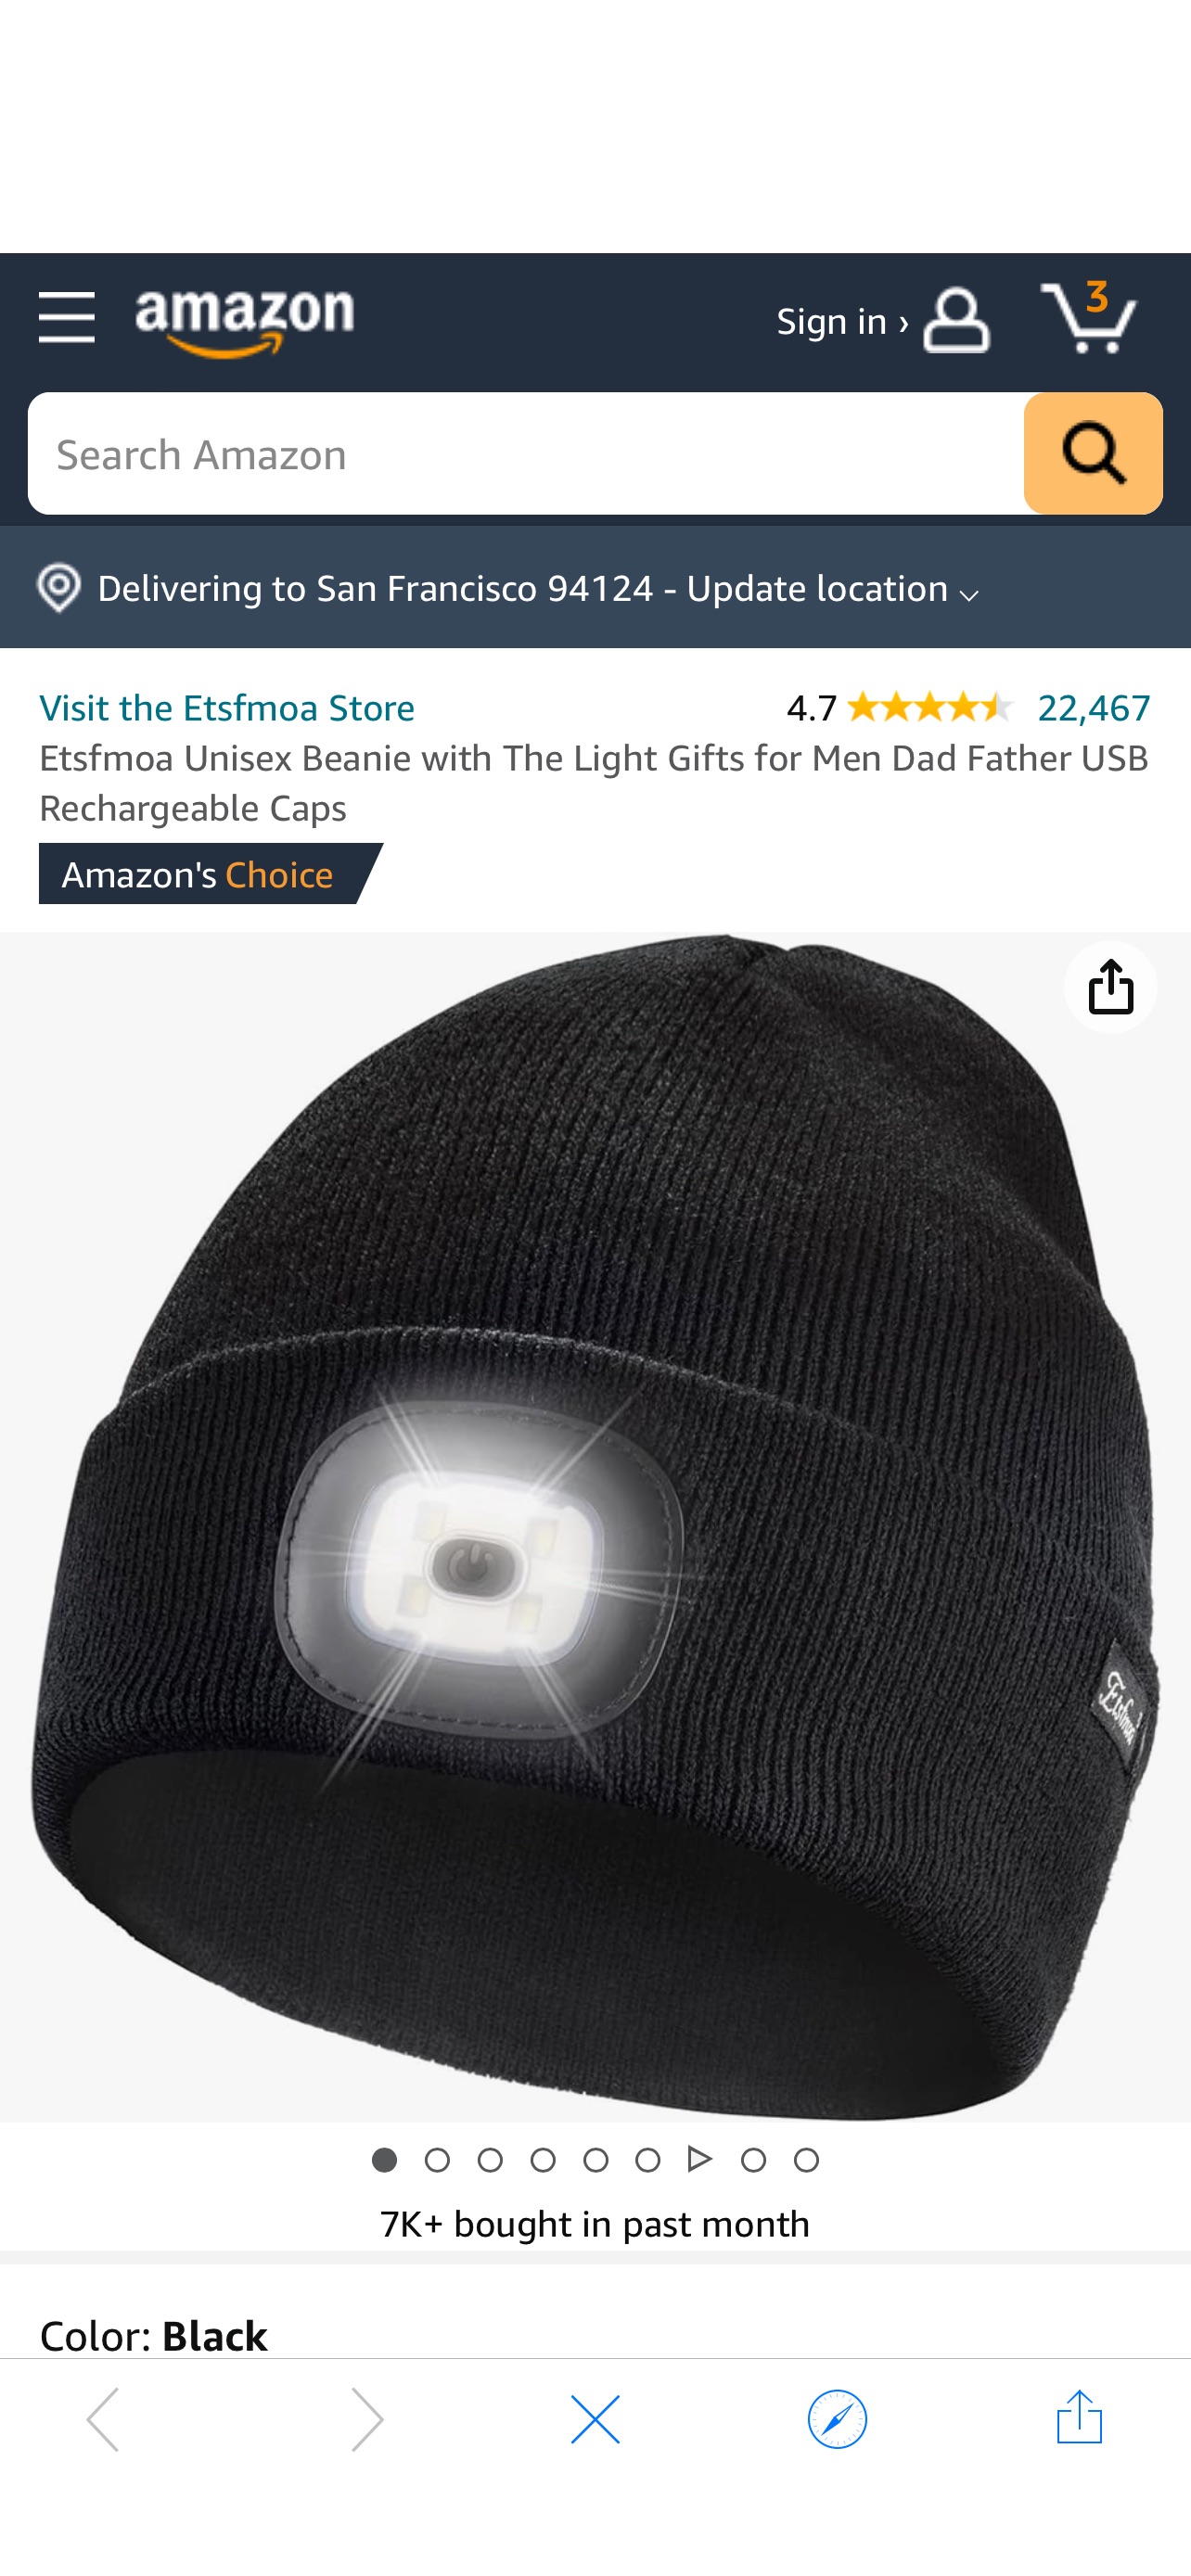 Amazon.com: Etsfmoa Unisex Beanie with The Light Gifts for Men Dad Father USB Rechargeable Caps Black : Clothing, Shoes & Jewelry亮灯帽子